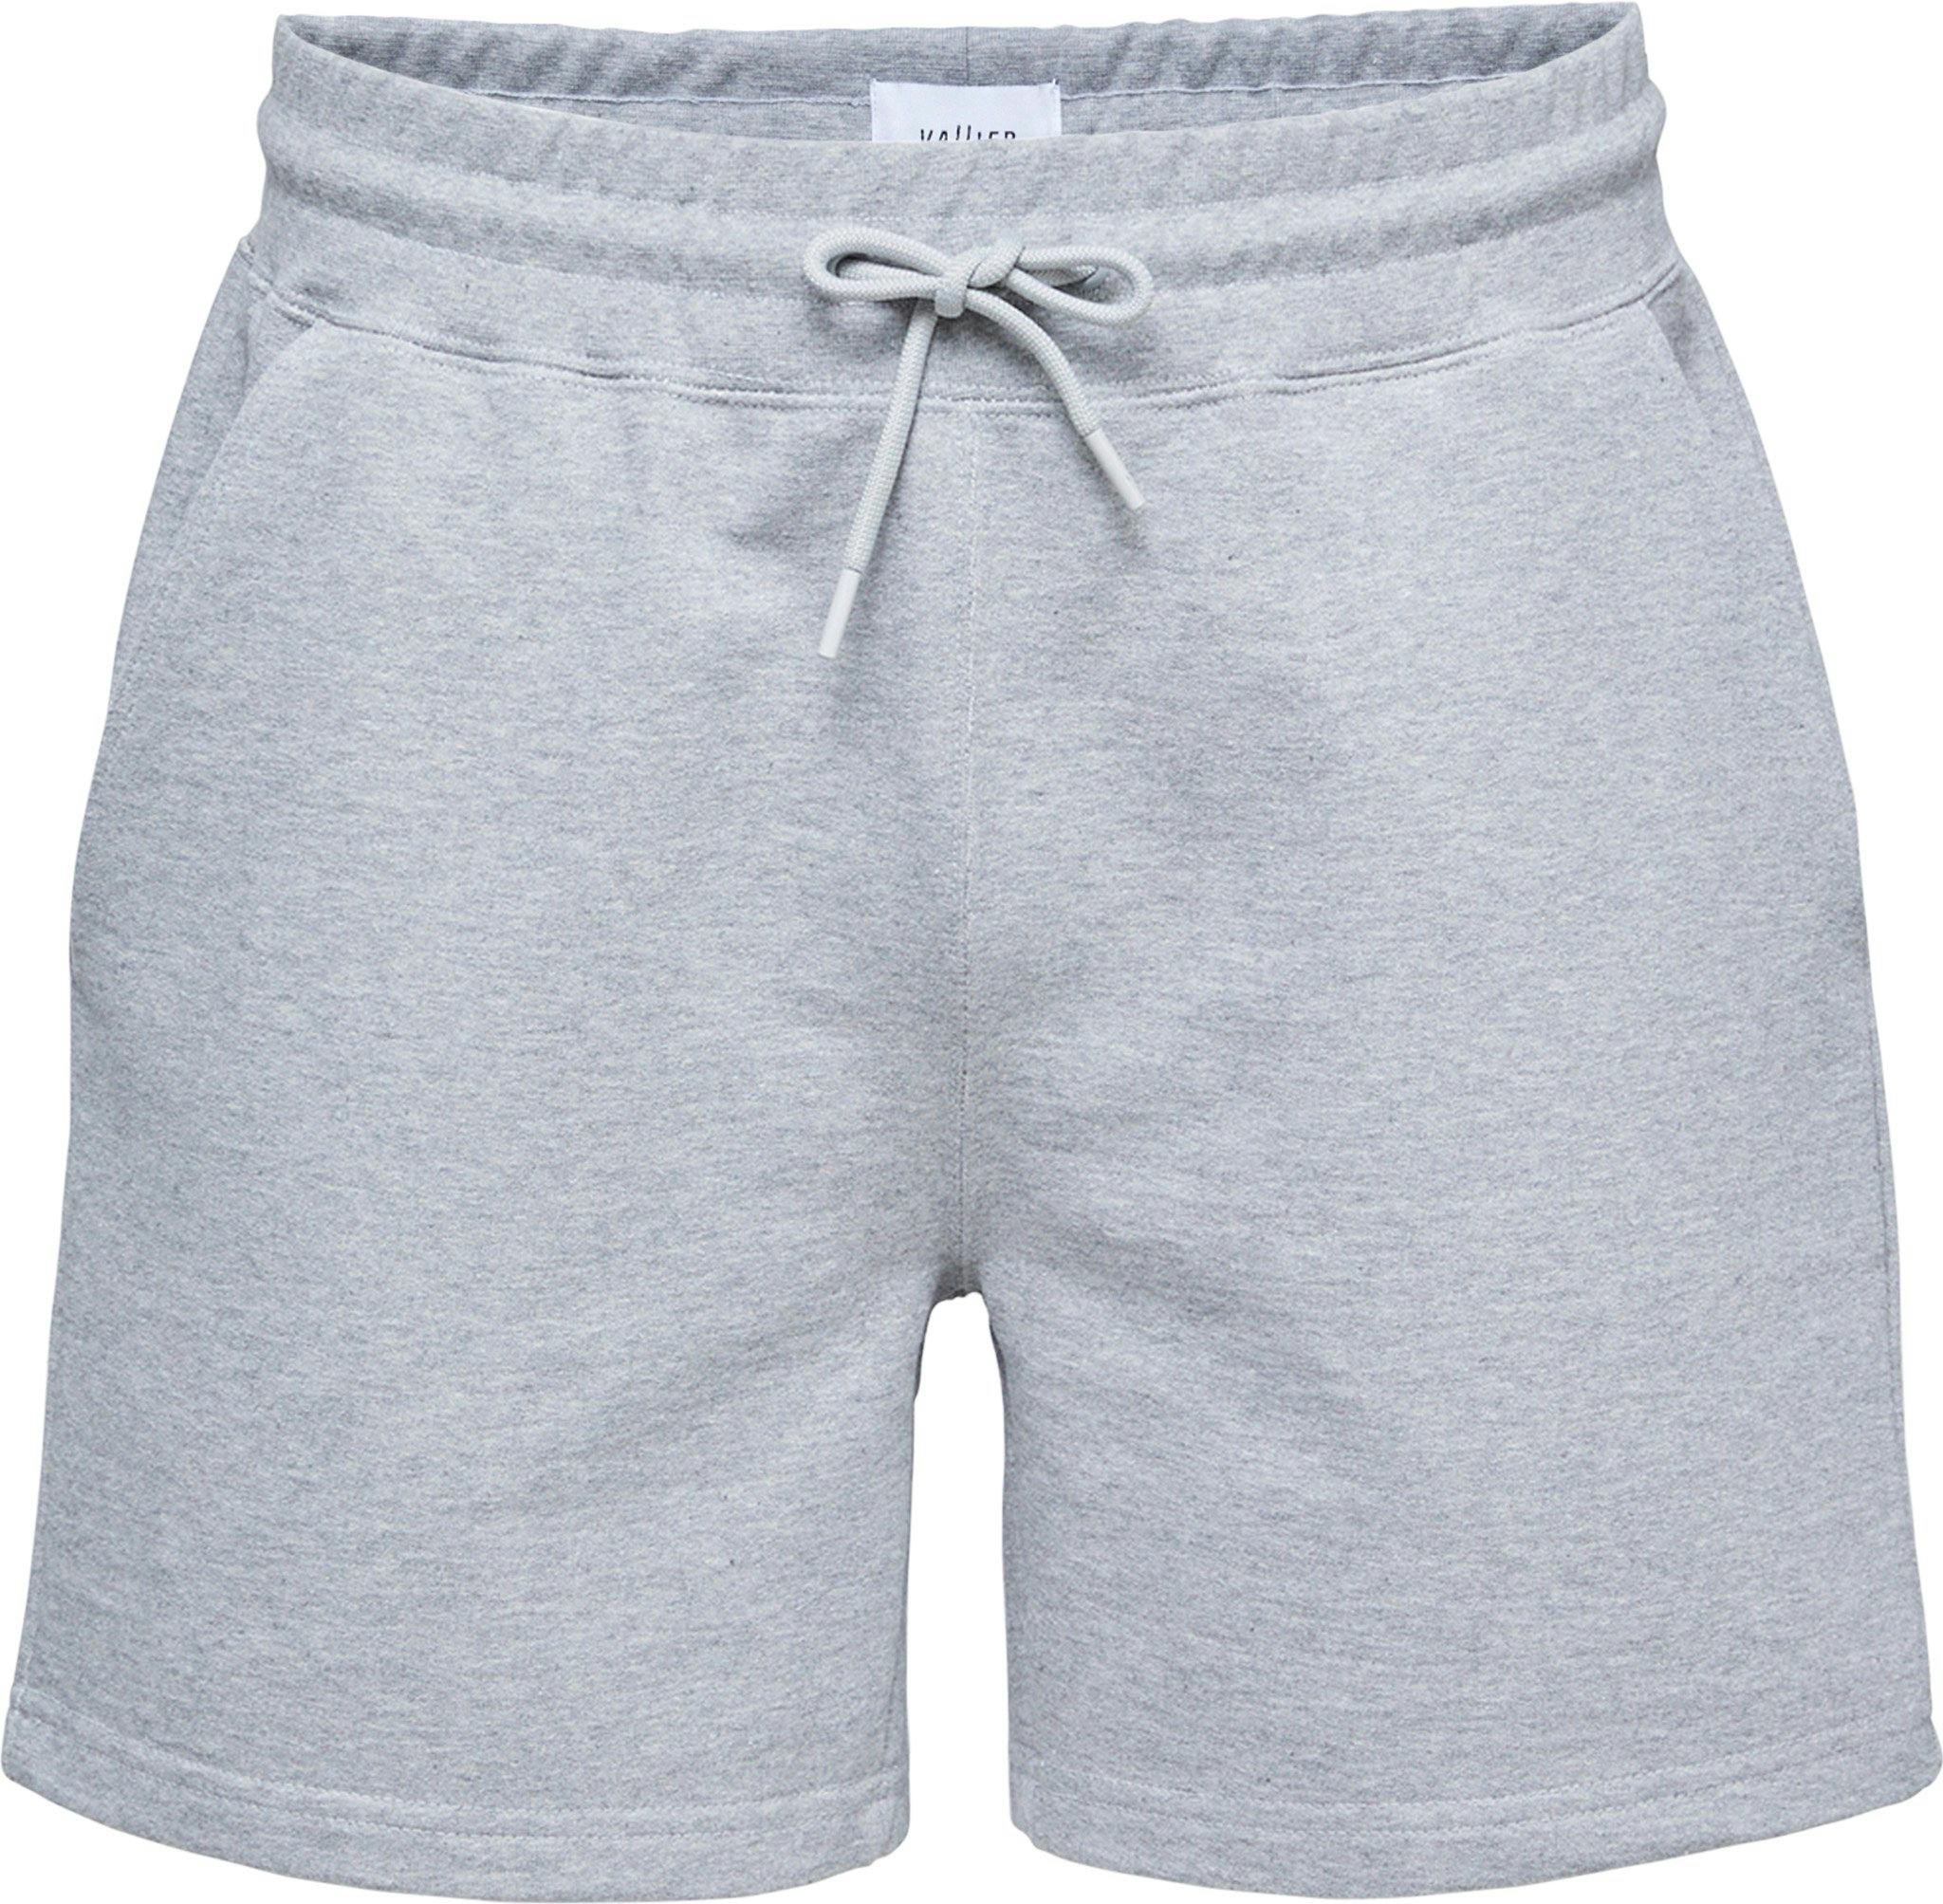 Product image for Onikan French Terry Short - Unisex